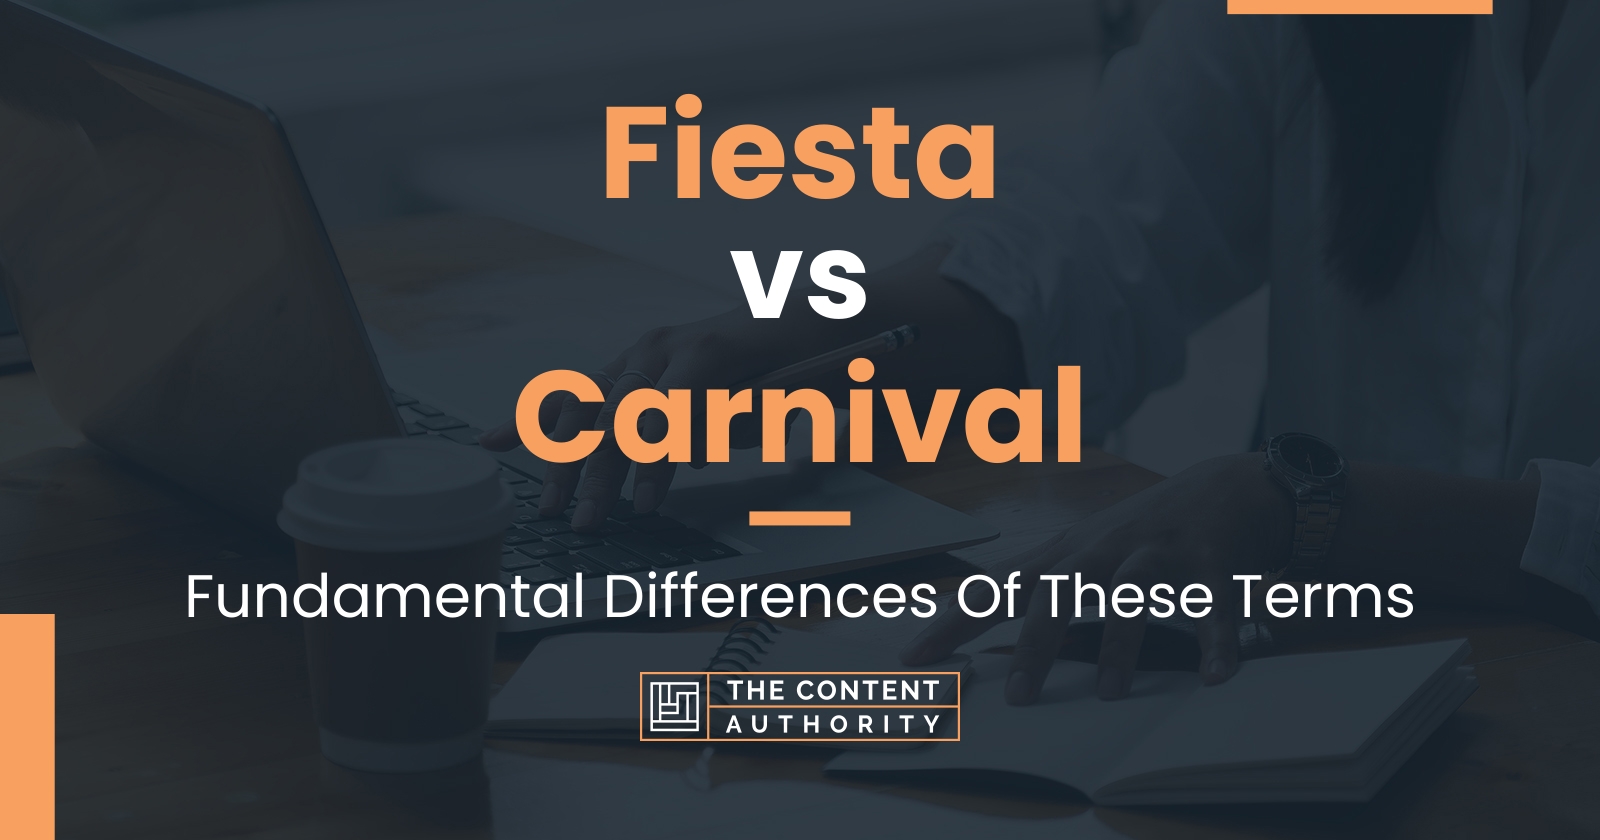 Fiesta vs Carnival: Fundamental Differences Of These Terms